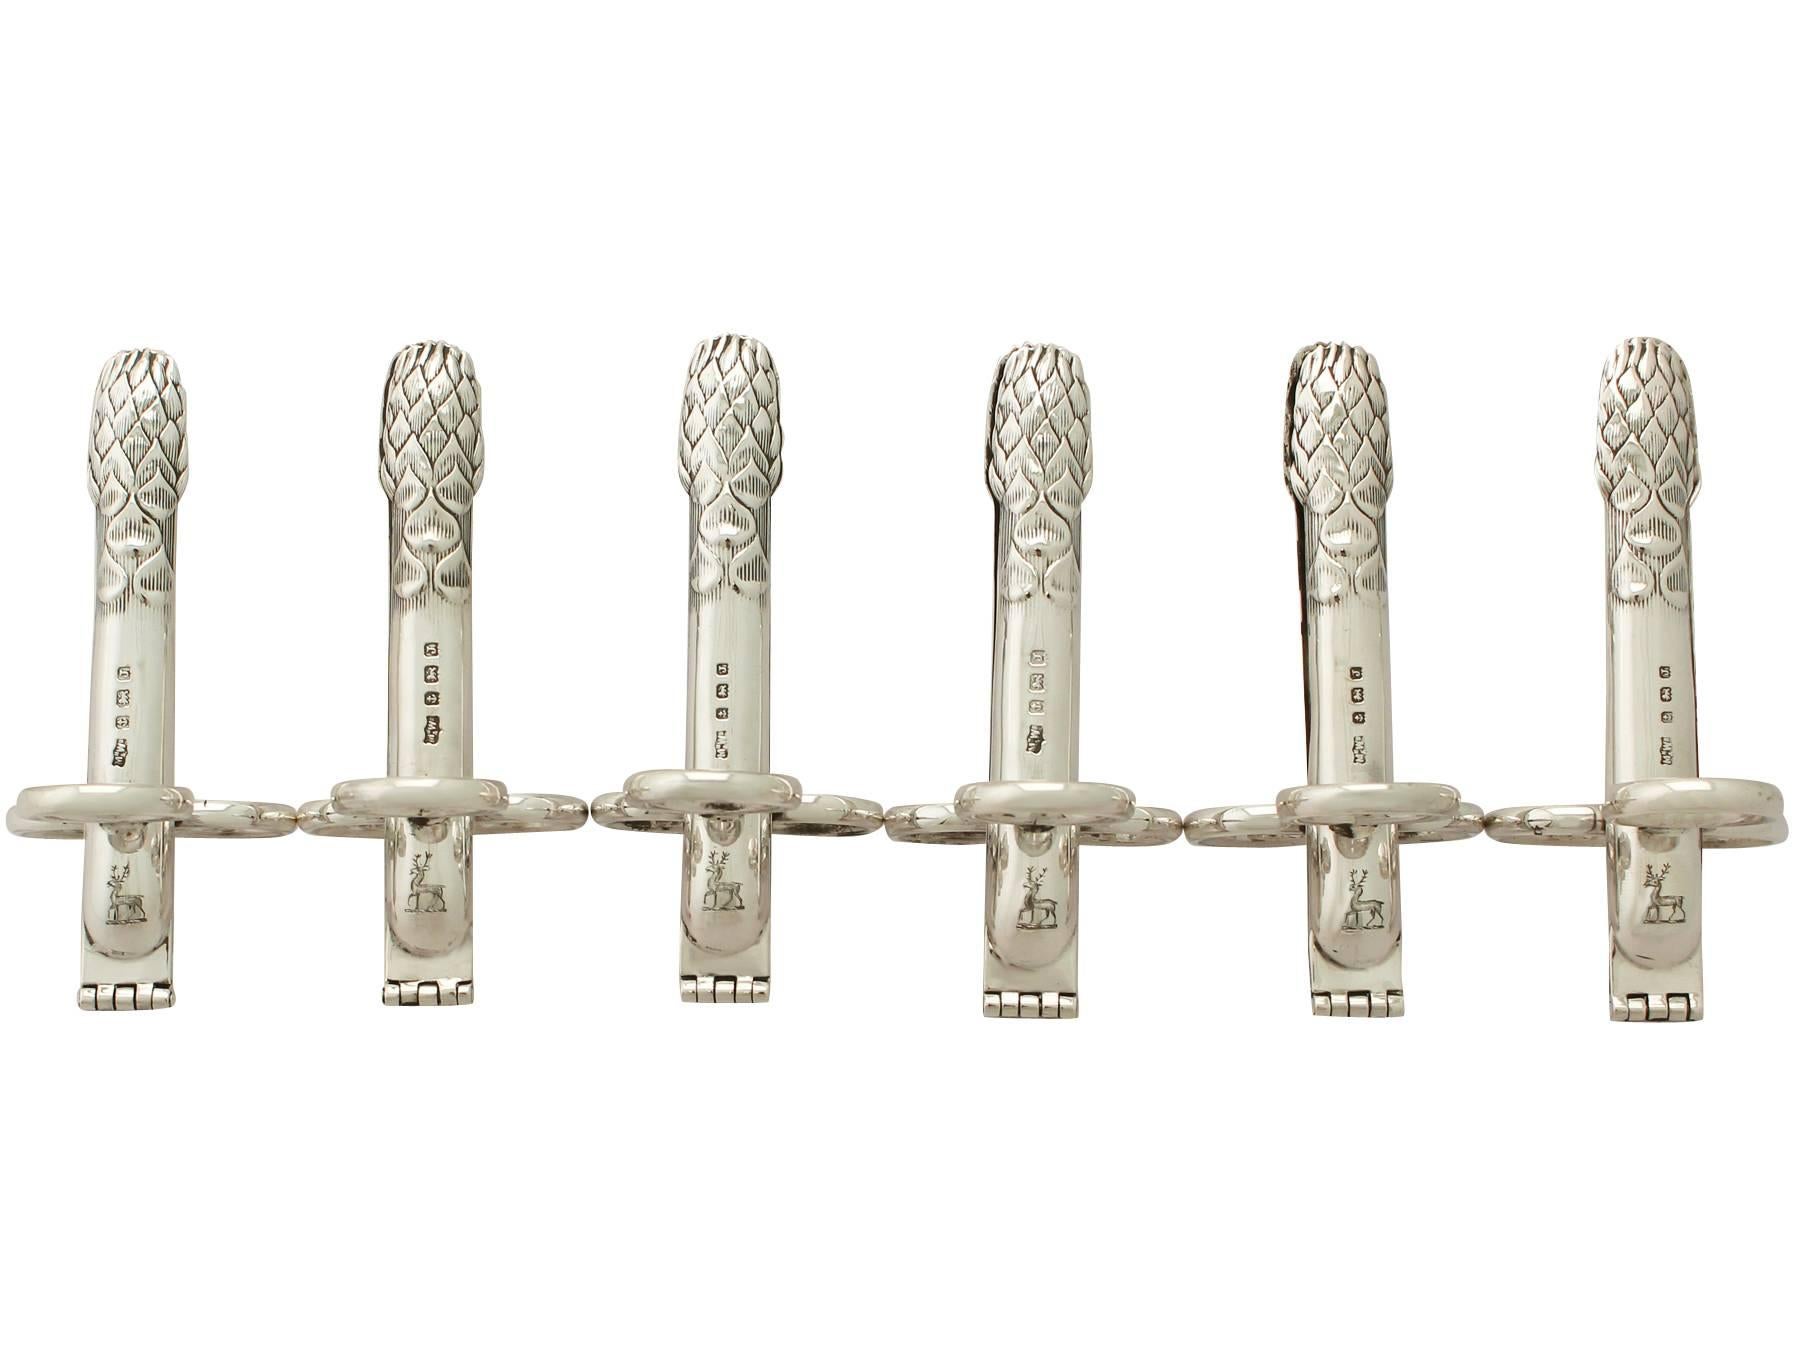 An exceptional, Fine and impressive, unusual set of six antique George V English sterling silver asparagus tongs - boxed; an addition to our silver dining collection.

This exceptional antique George V set of six asparagus tongs have been modelled